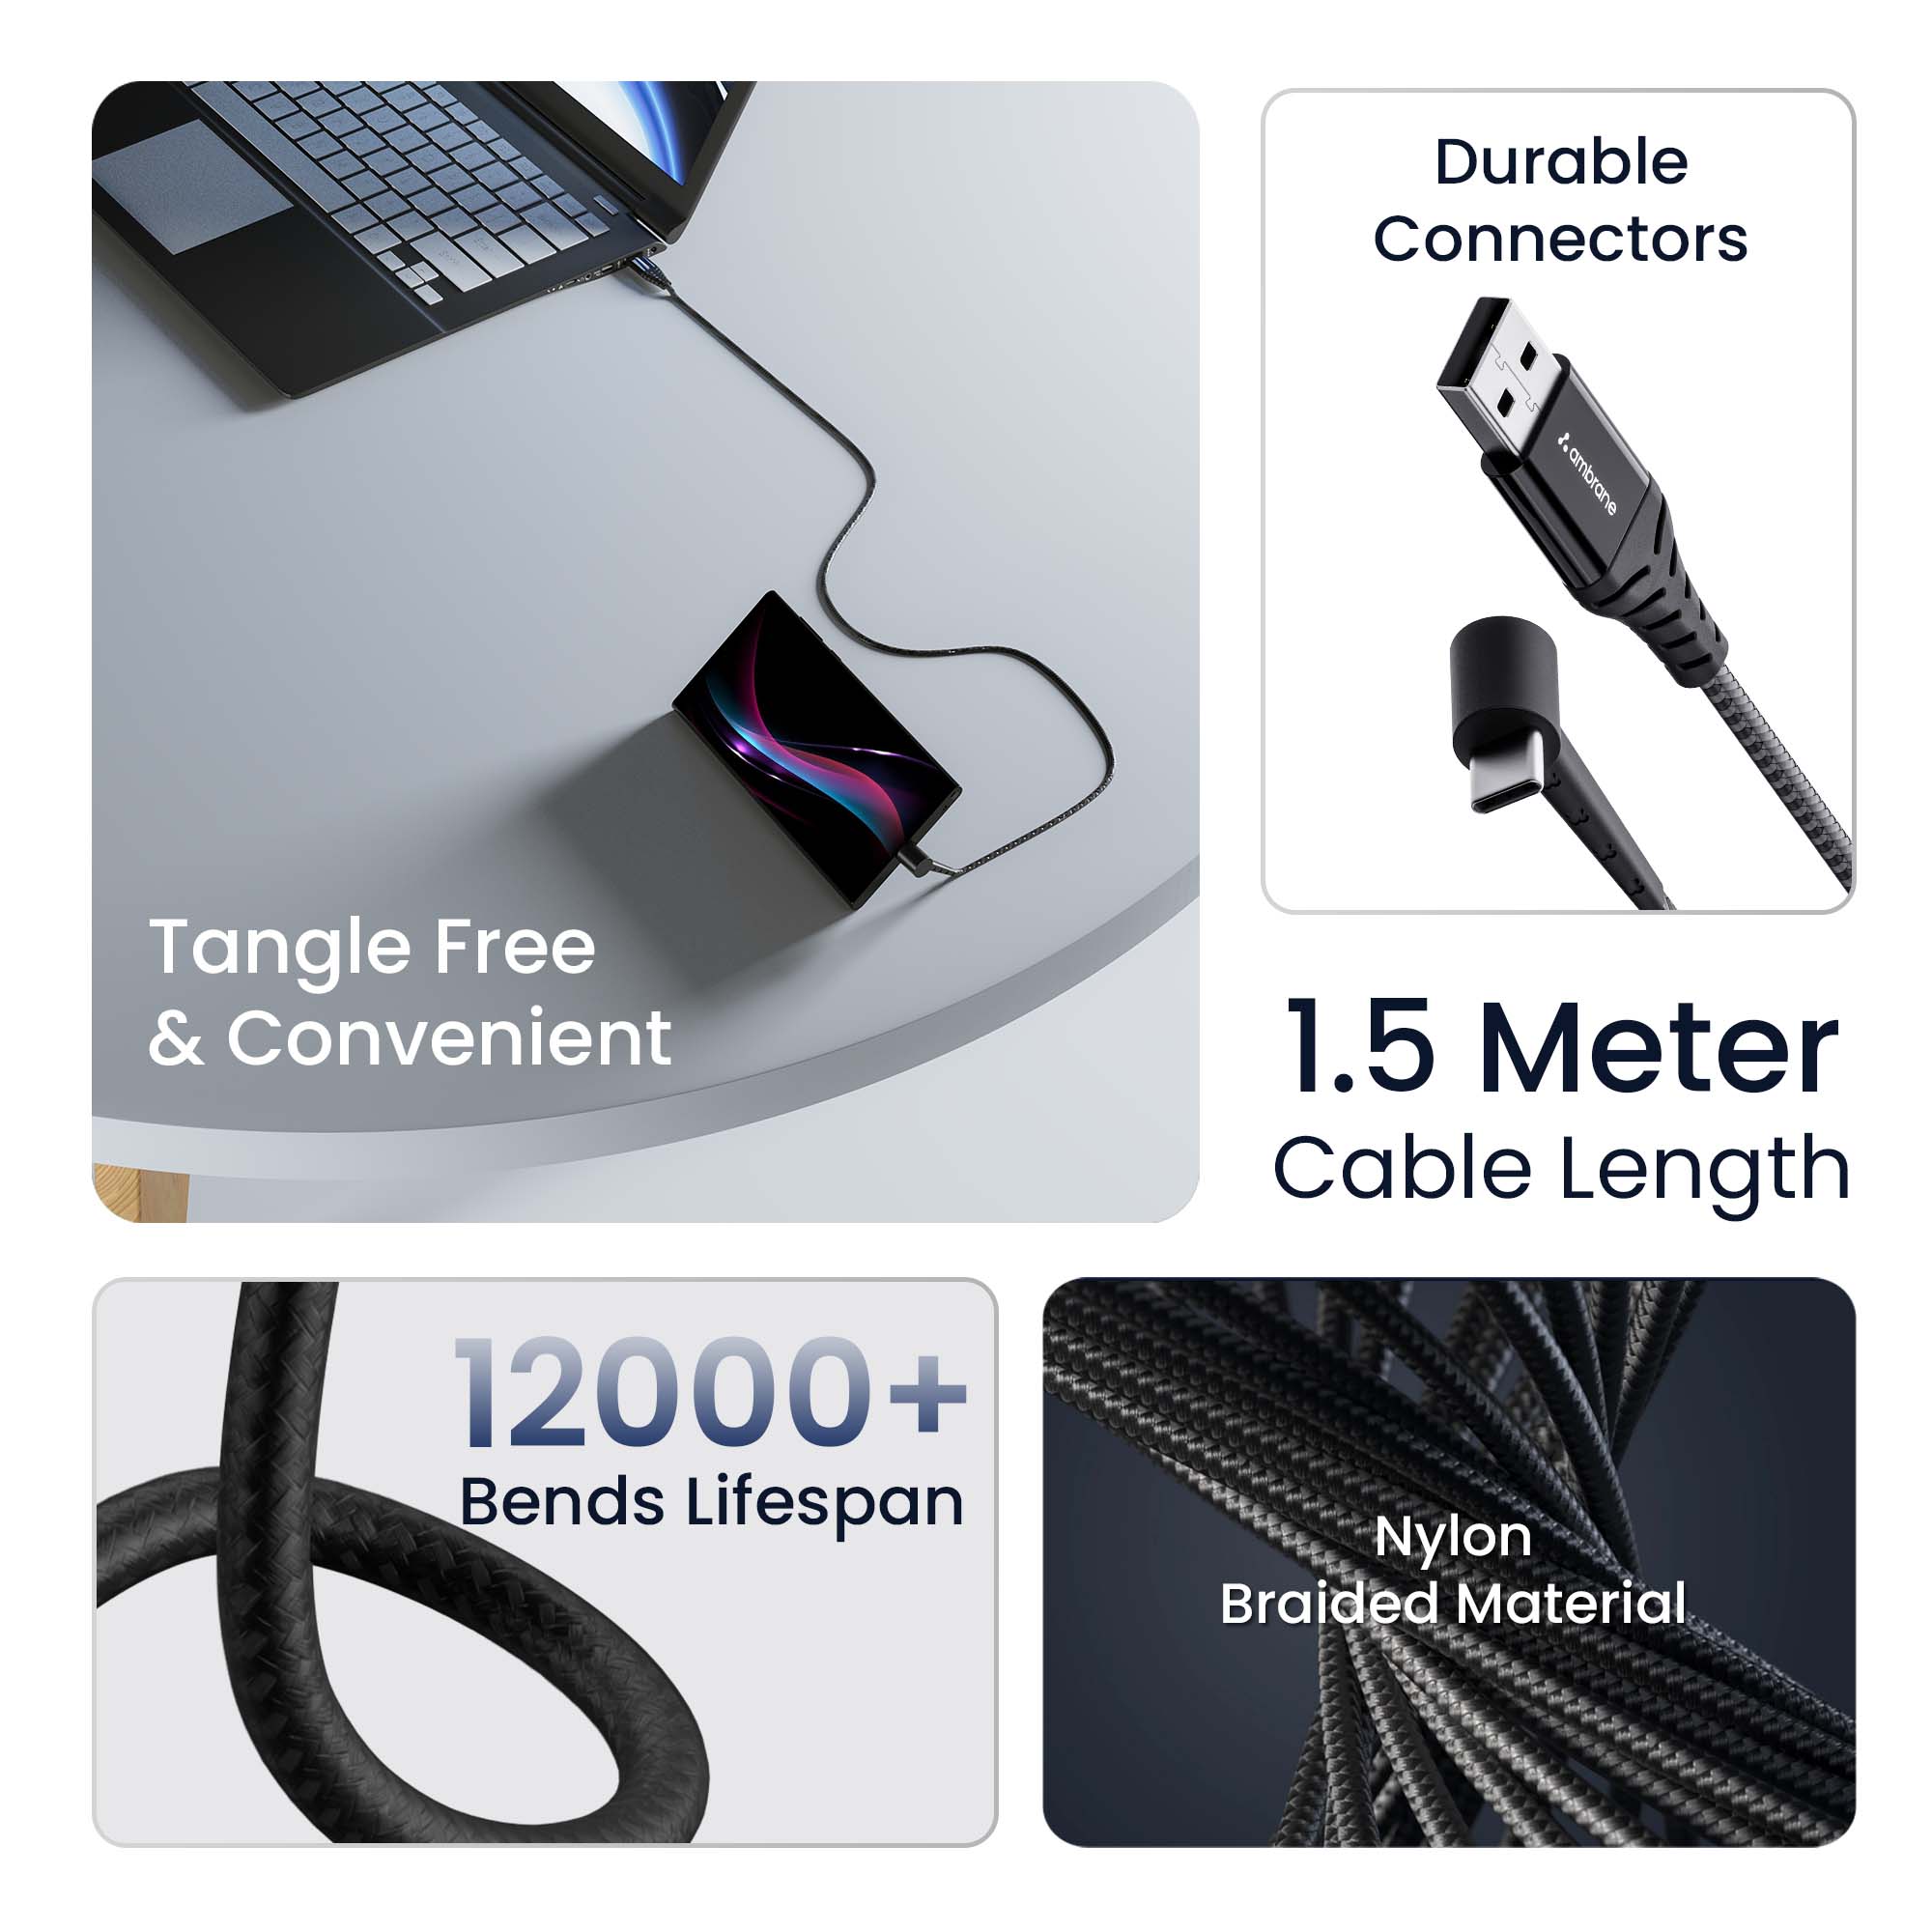 Standing Type C Cable